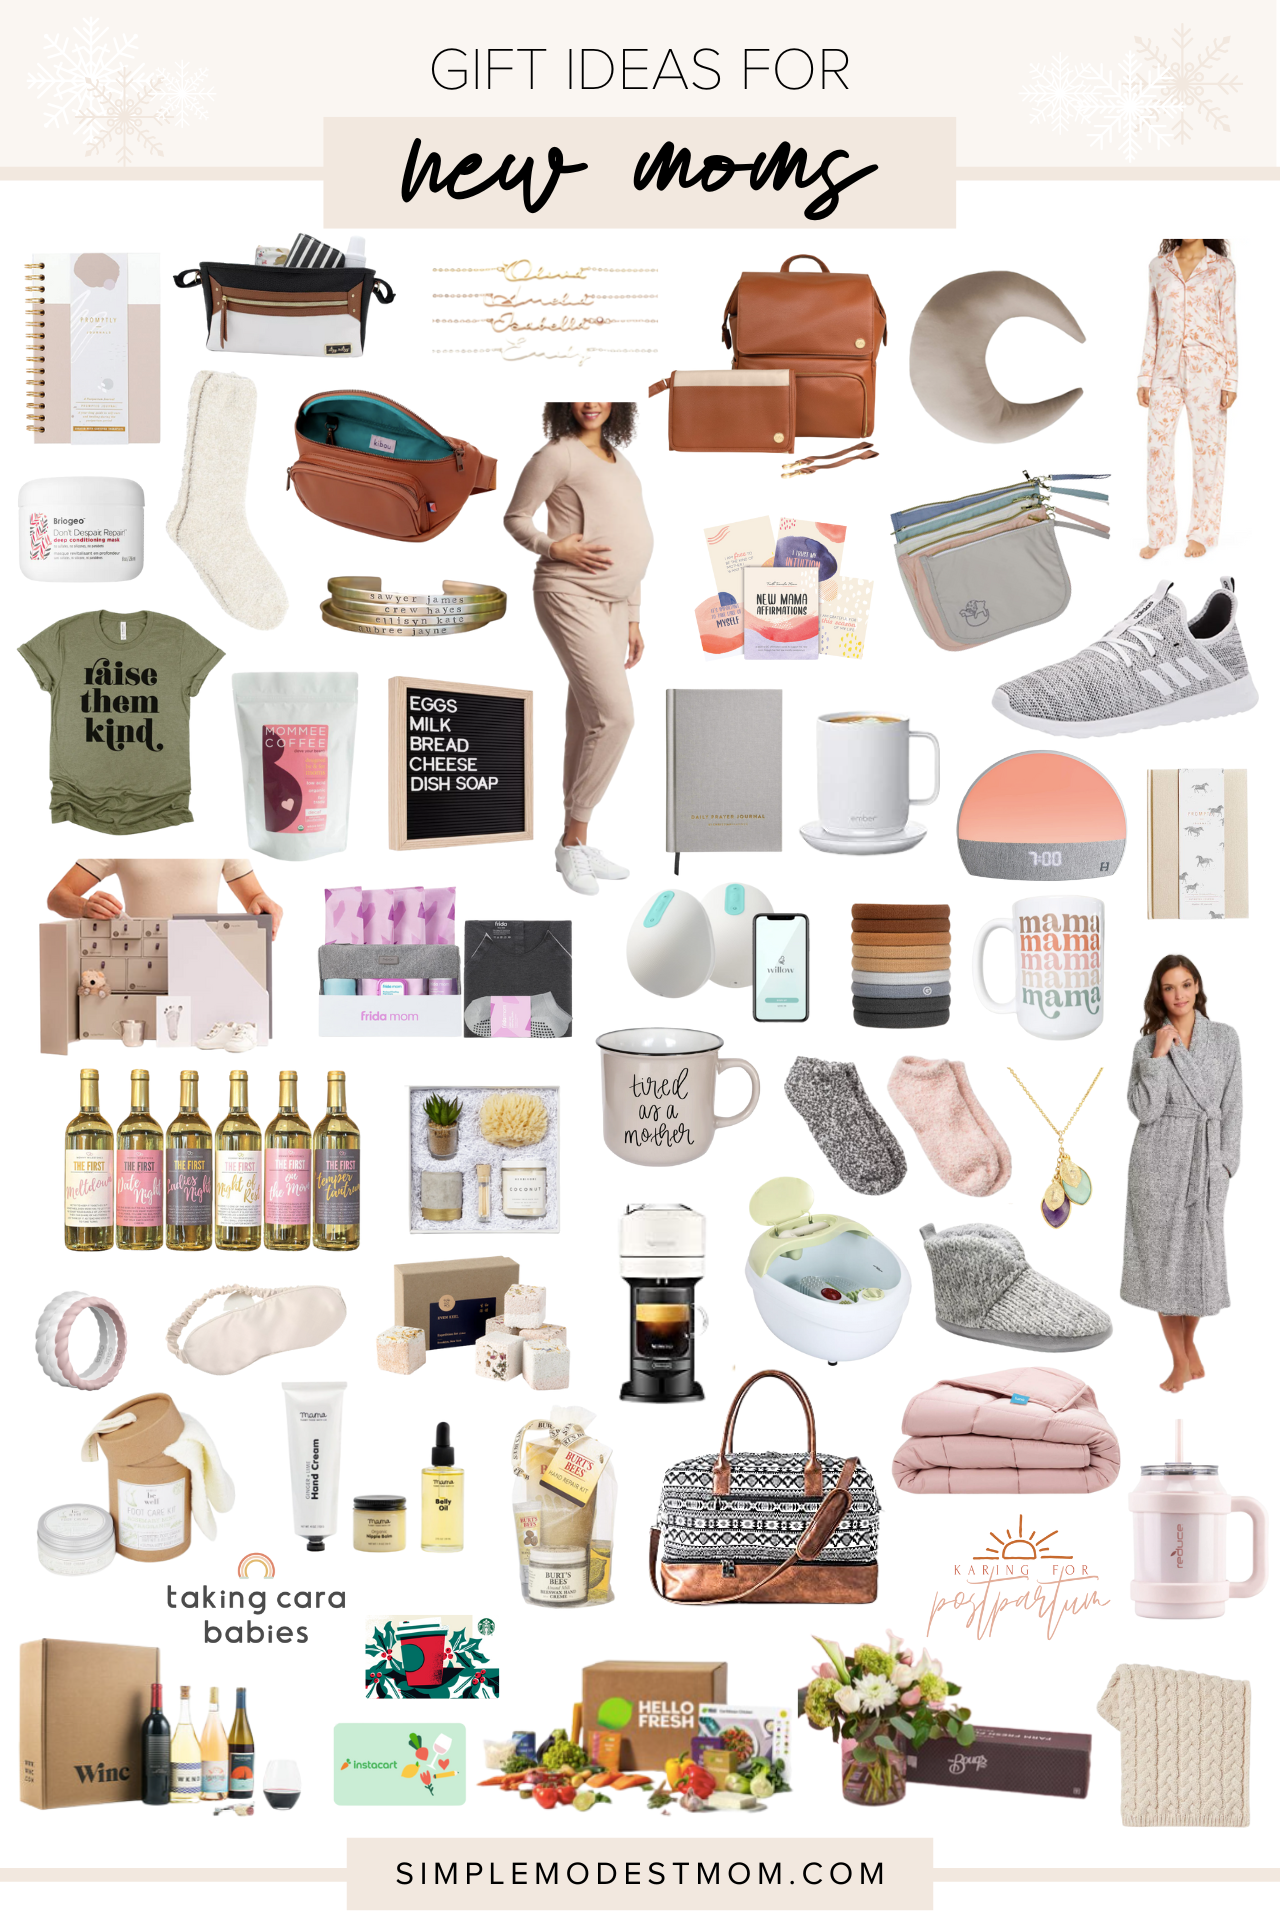 The Ultimate New Mom Gift Guide: Must-Have Presents to Celebrate Motherhood